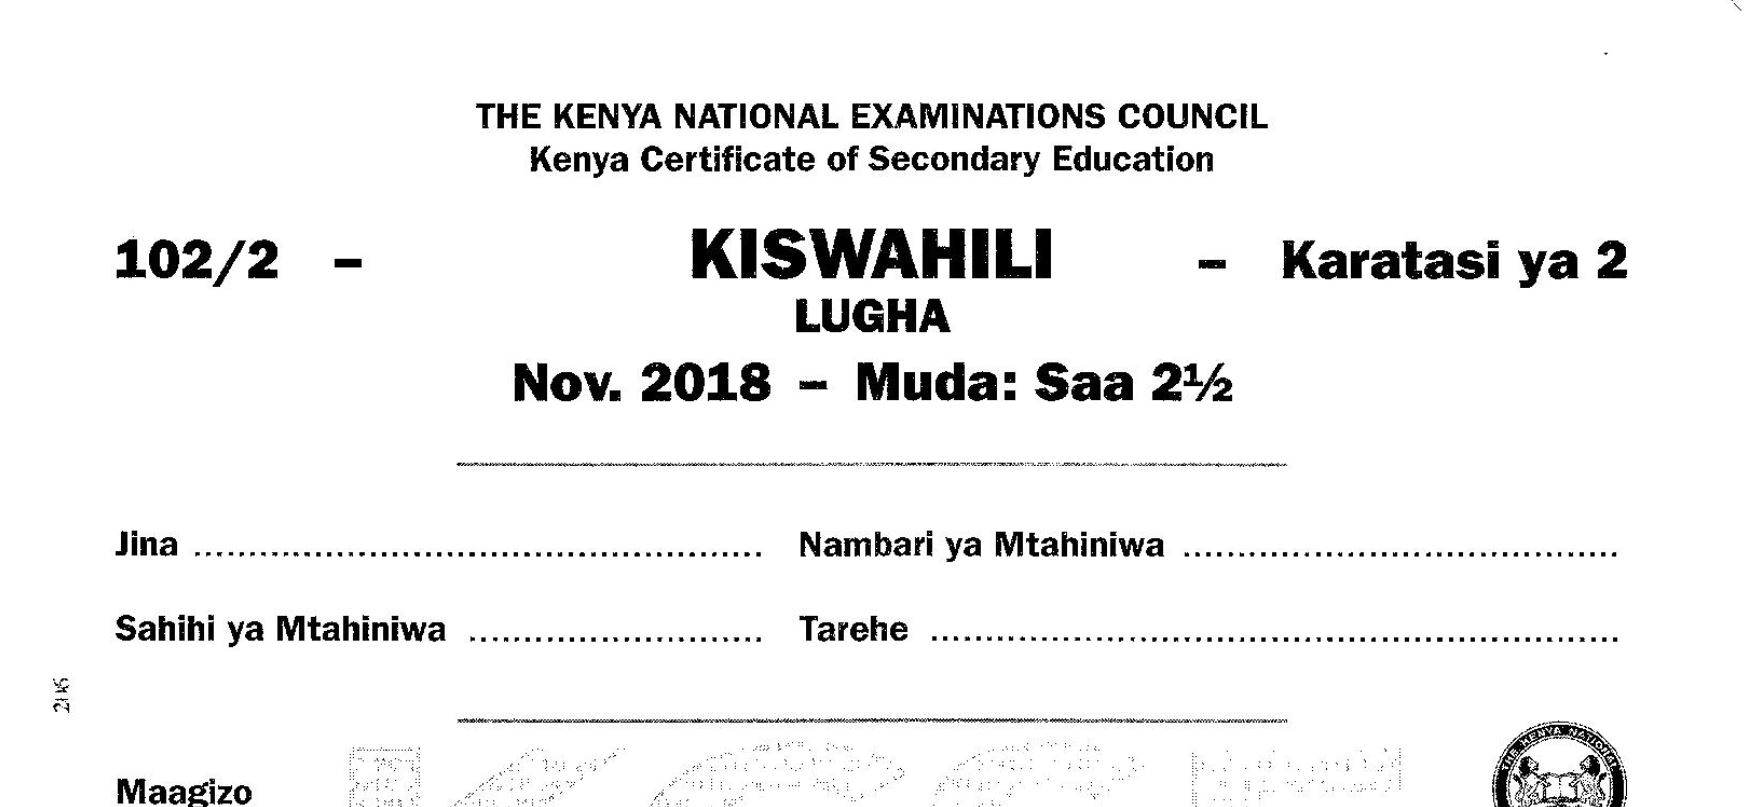 KCSE Kiswahili Paper 2, 2018 with KNEC Marking Scheme (Answers)